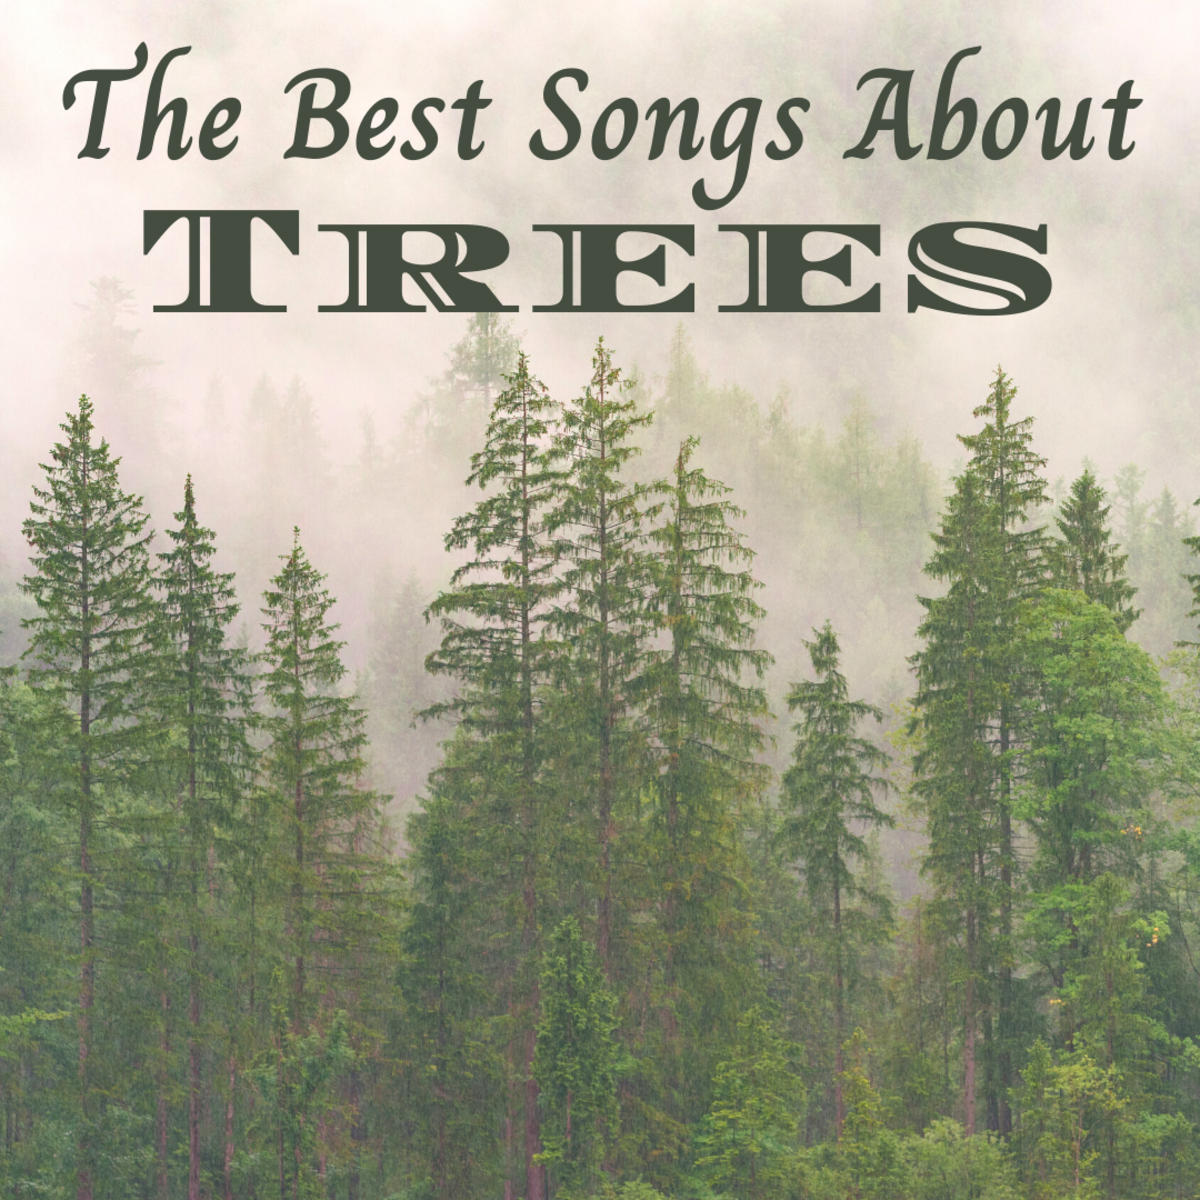 100 Best Songs About Trees